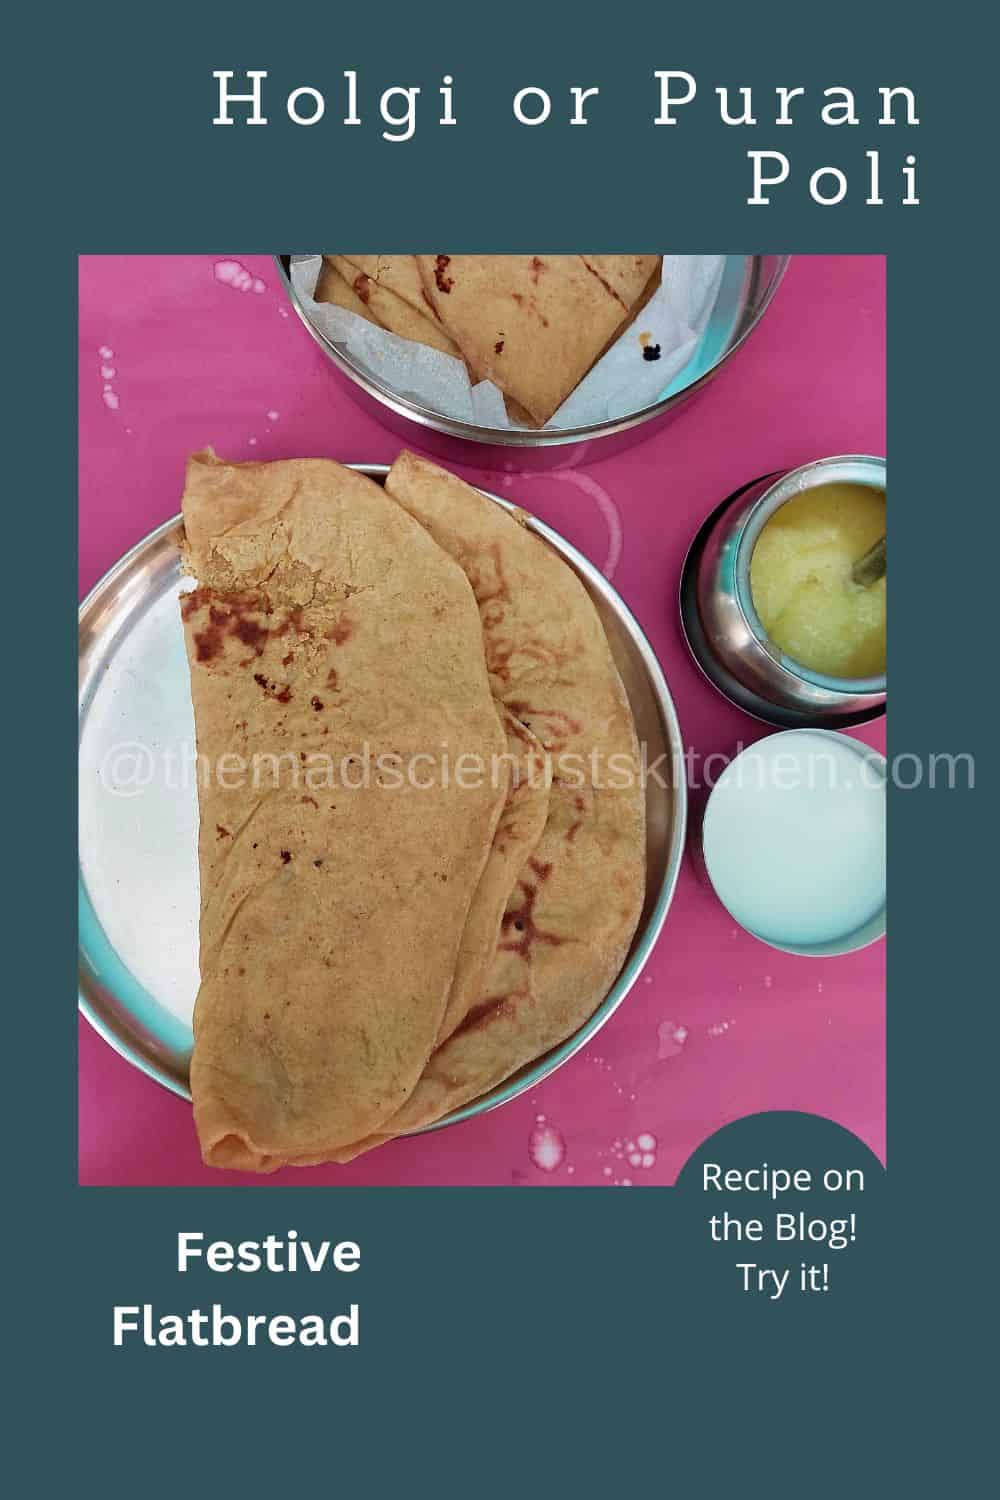 Made Holige or Puran poli for Holi this year.